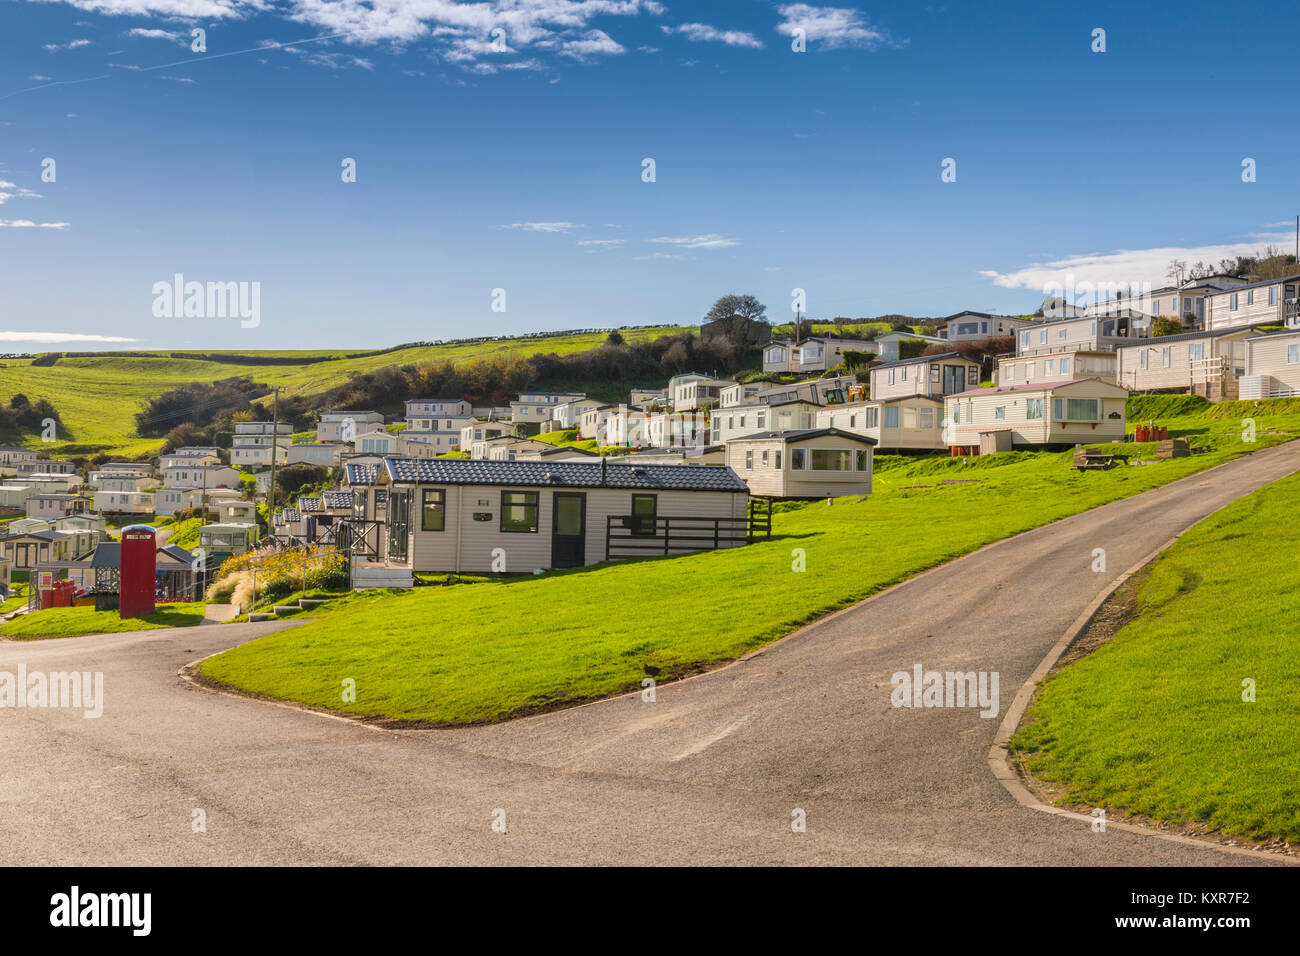 An unsightly collection of permanent caravan pitches close to the S.W. Coast Path at Beer on the Jurassic Coast, Devon, England, UK Stock Photo